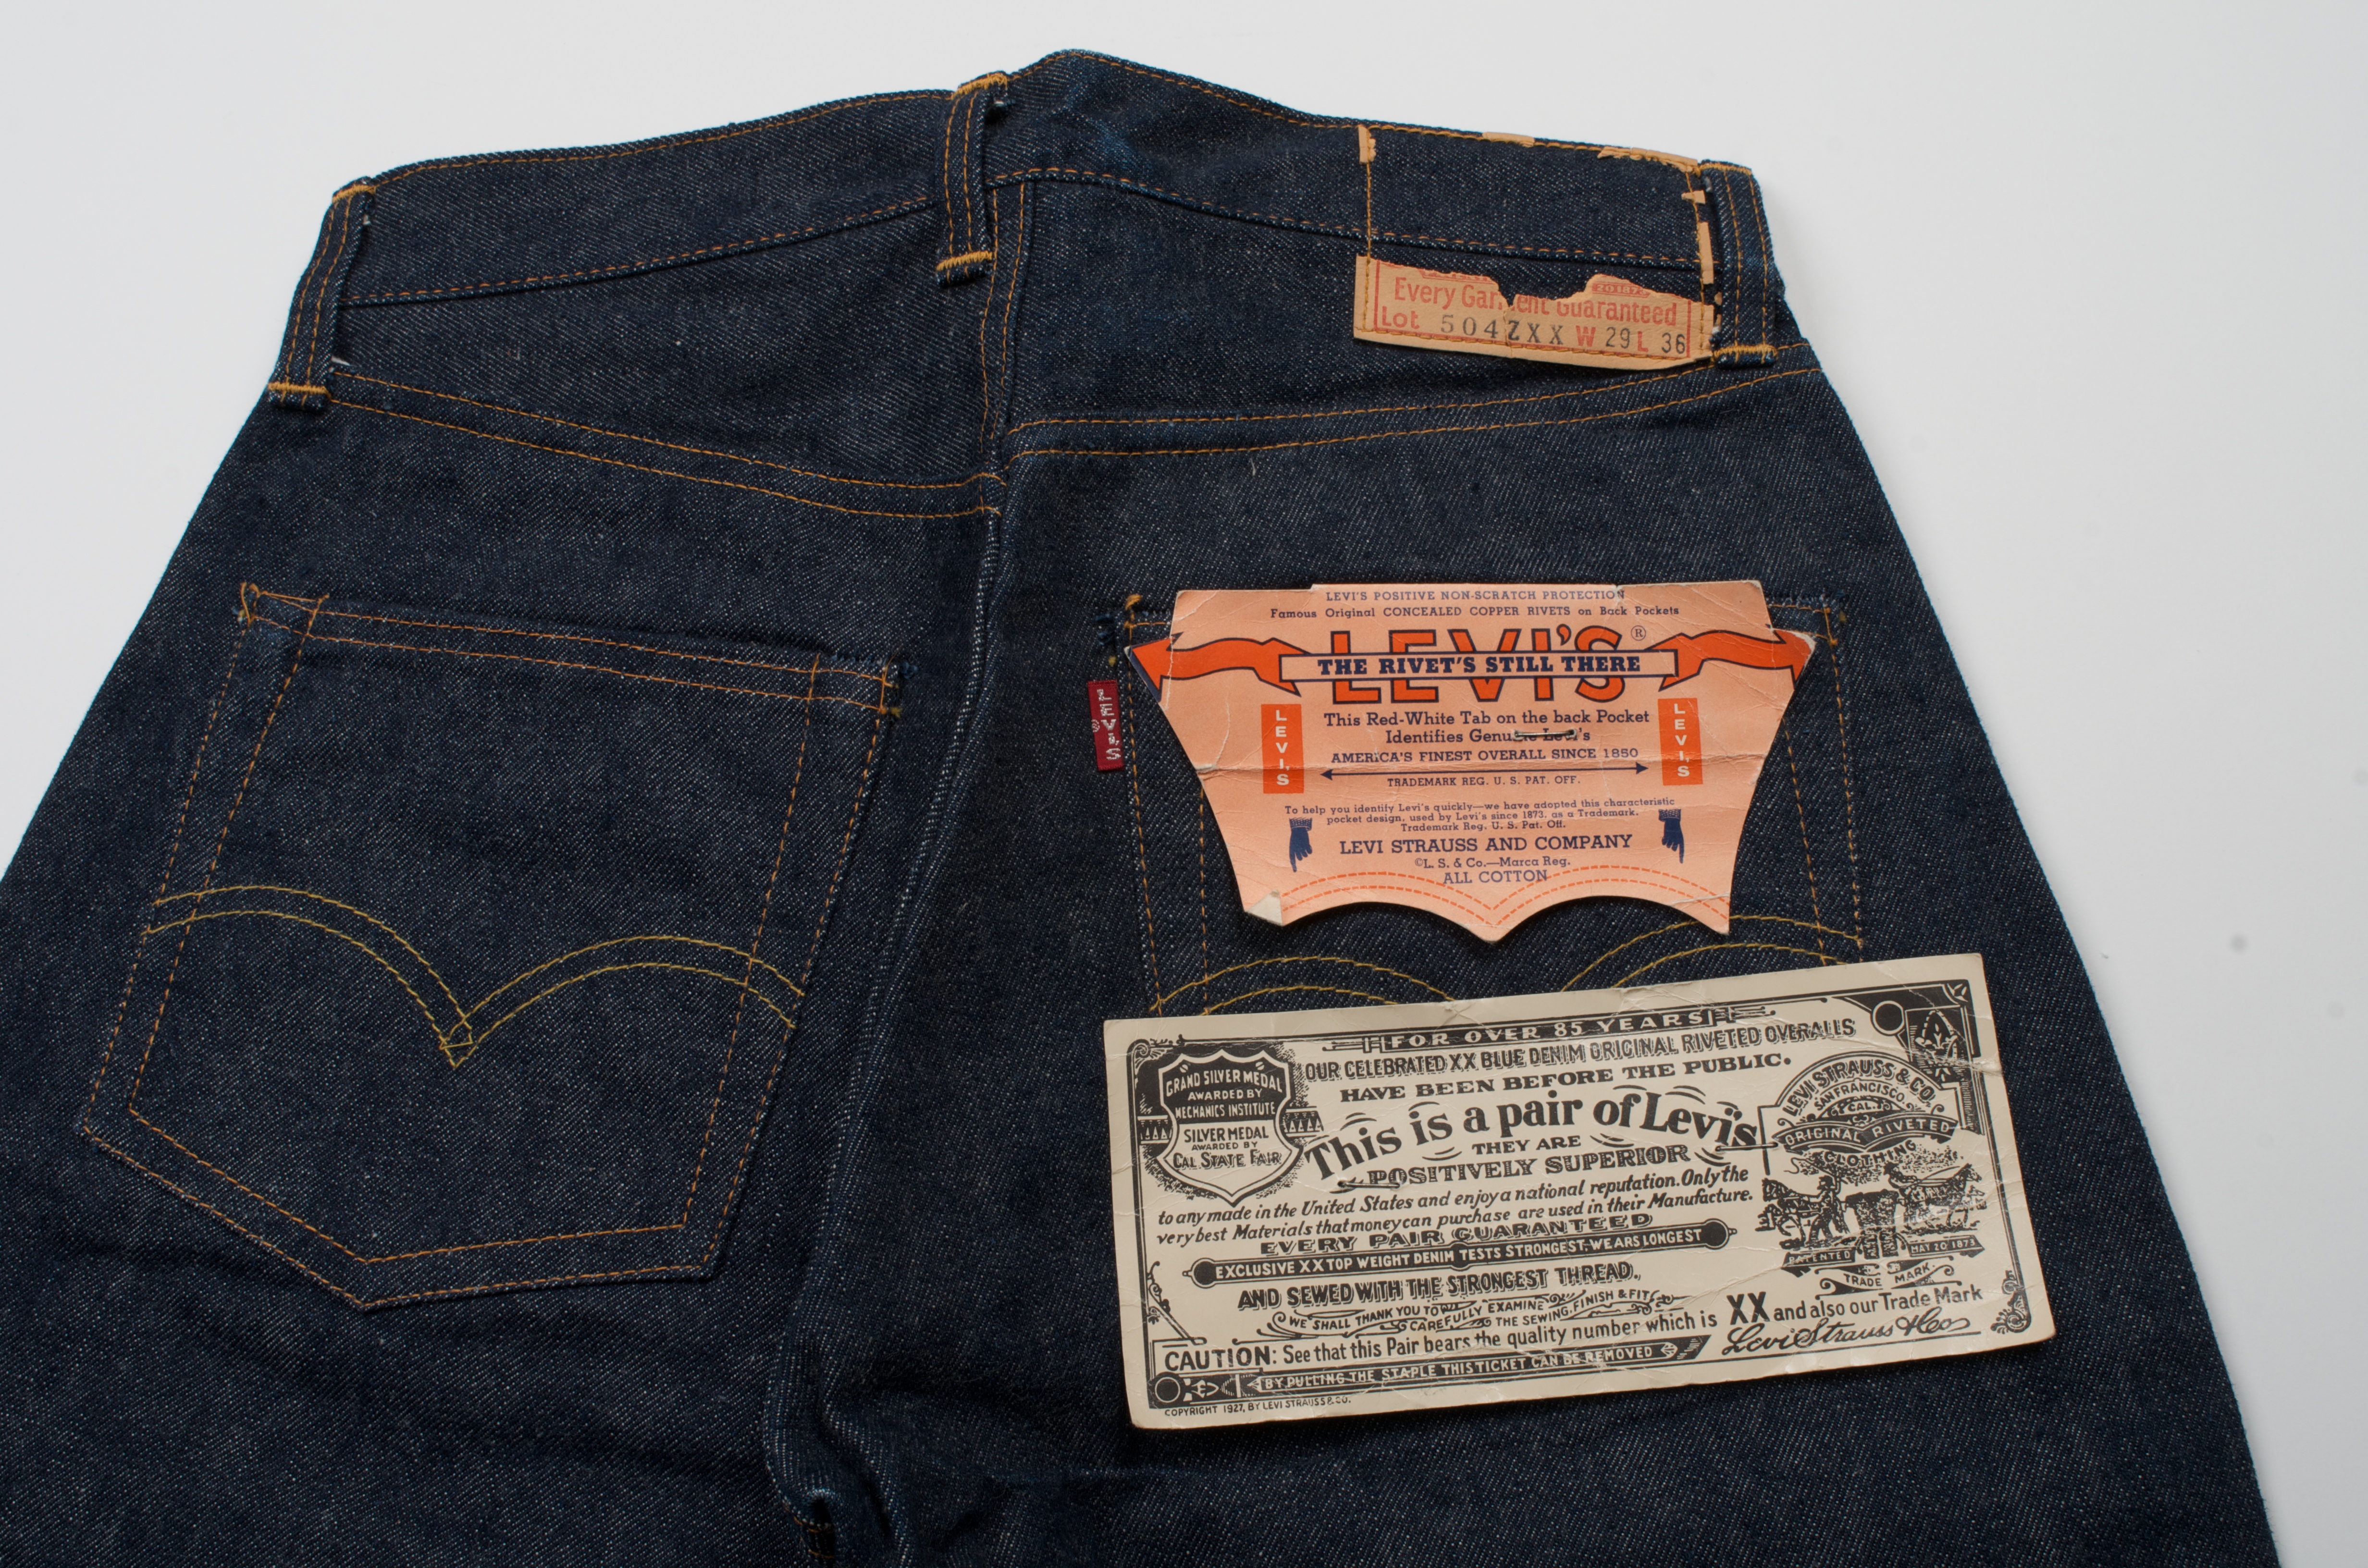 Guarantee Ticket from a pair of 1950s 501® jeans.